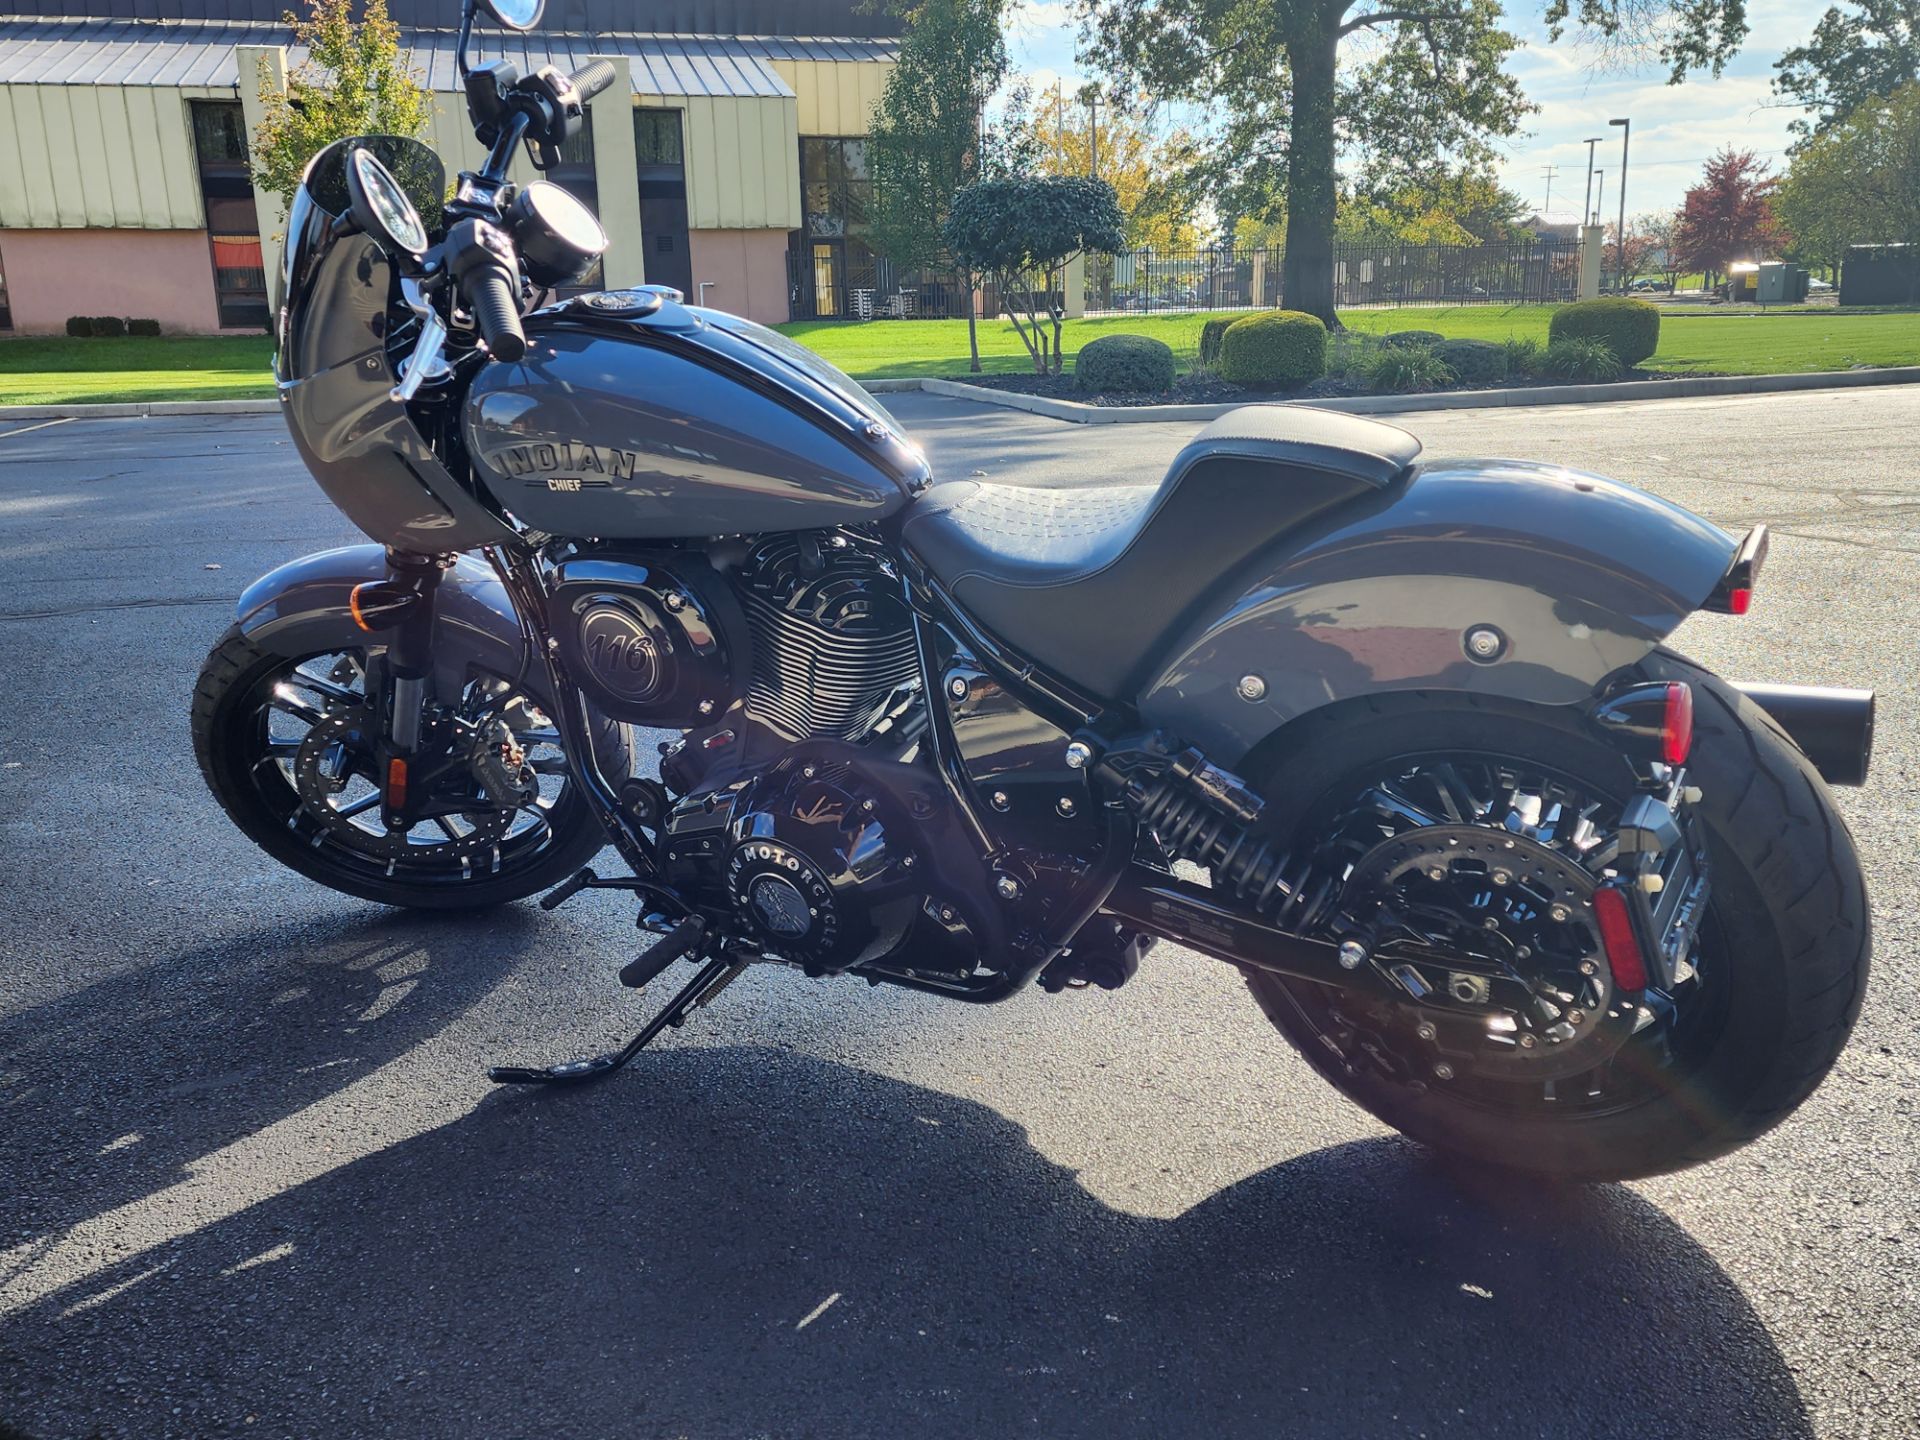 2023 Indian Motorcycle Sport Chief Dark Horse® in Elkhart, Indiana - Photo 2